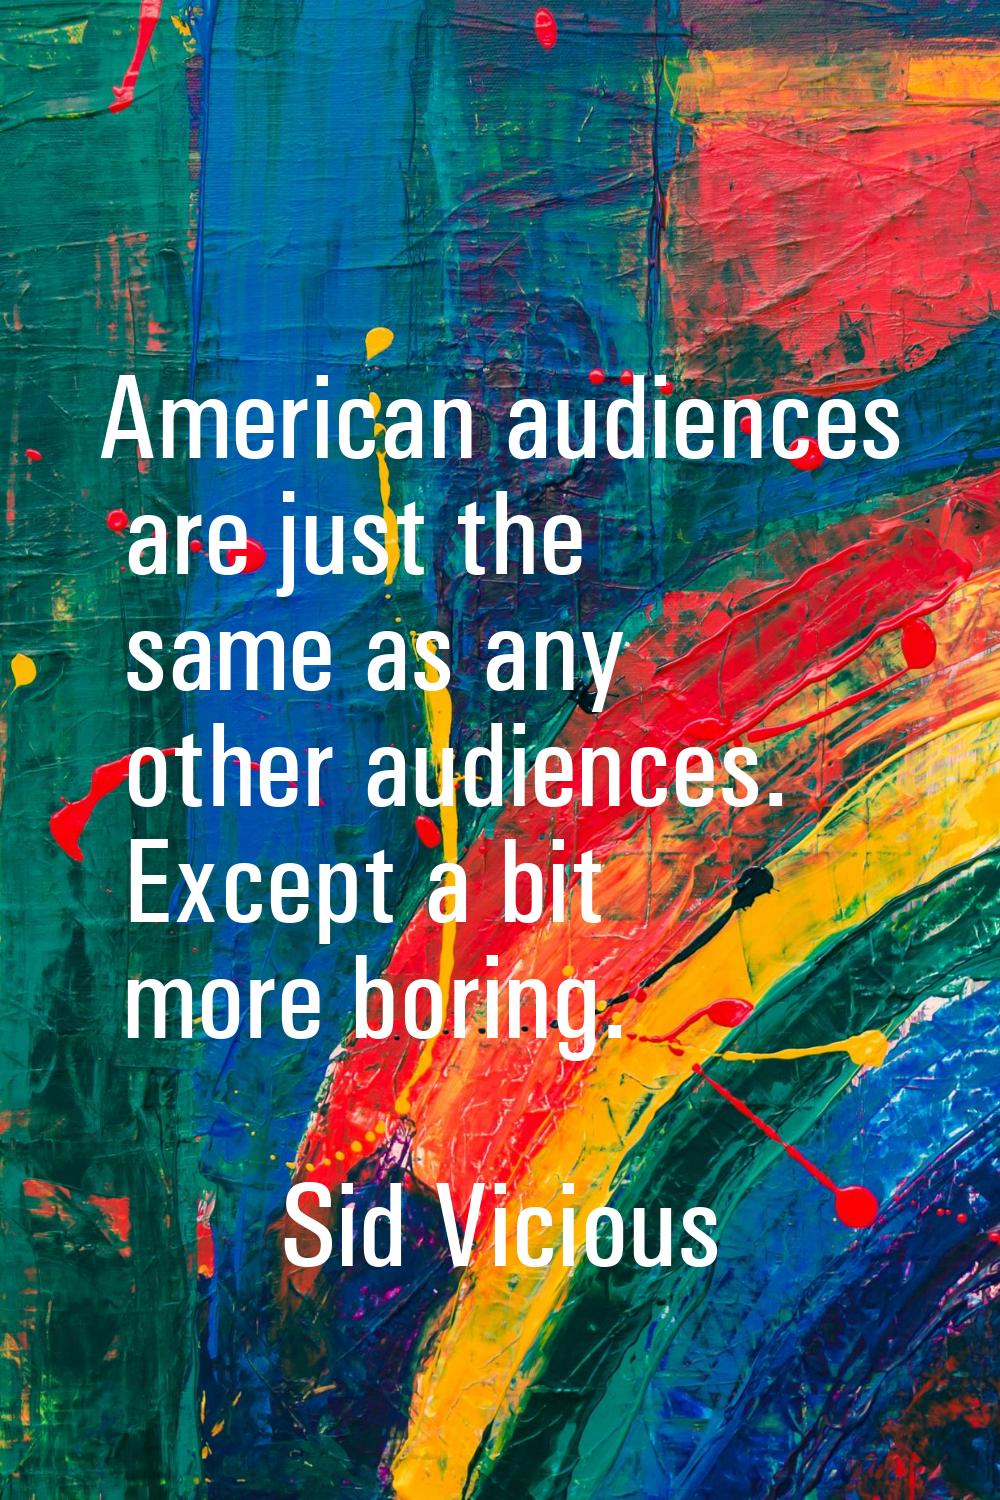 American audiences are just the same as any other audiences. Except a bit more boring.